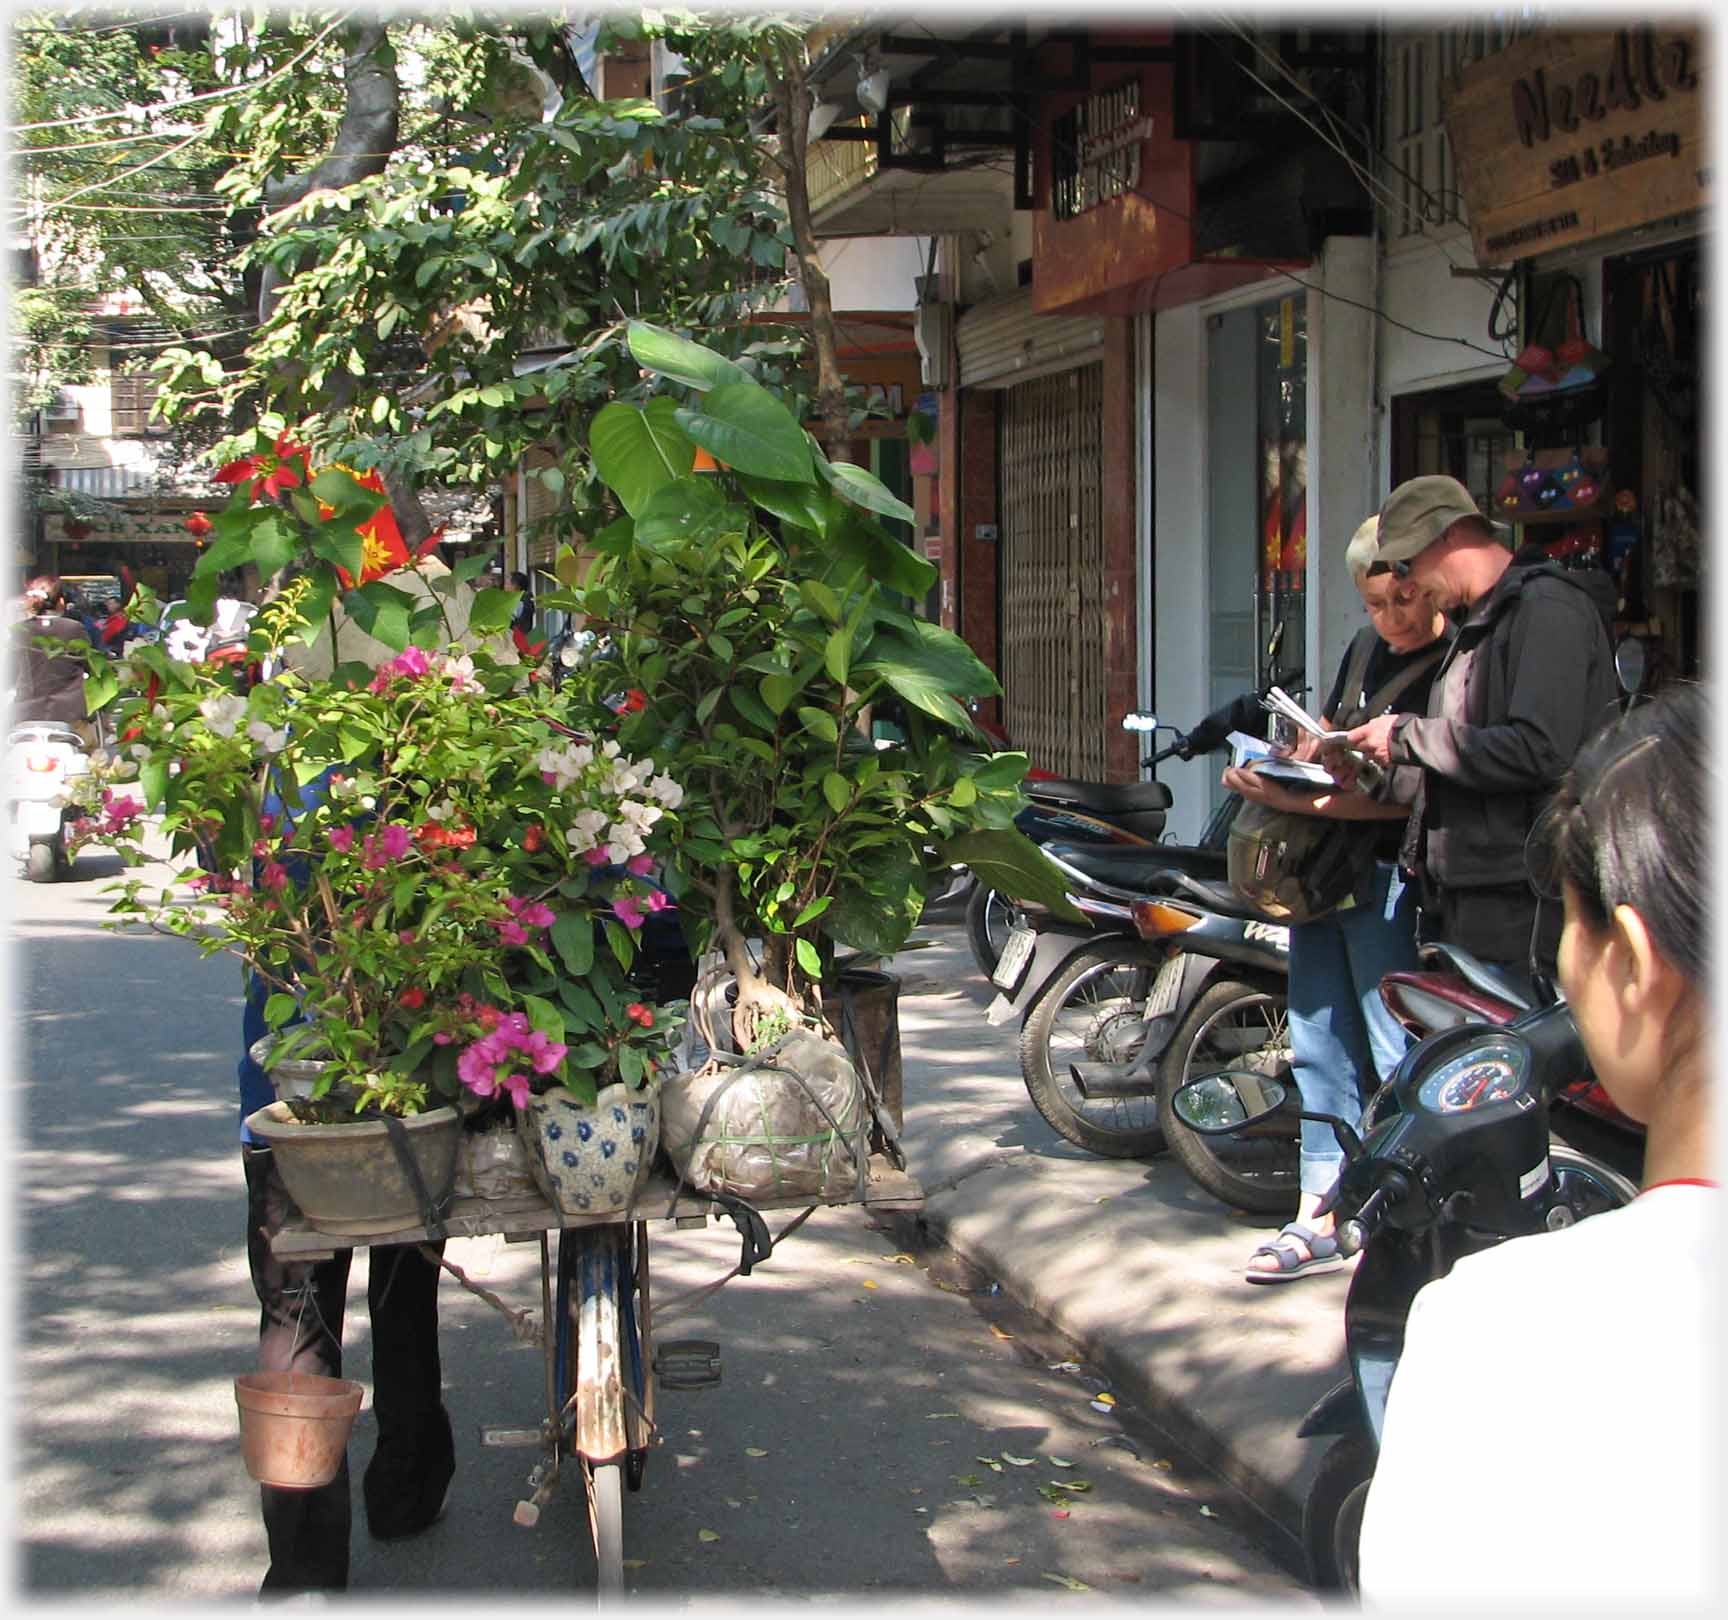 A range of potted plants being wheeled past two tourists engrossed in their maps.